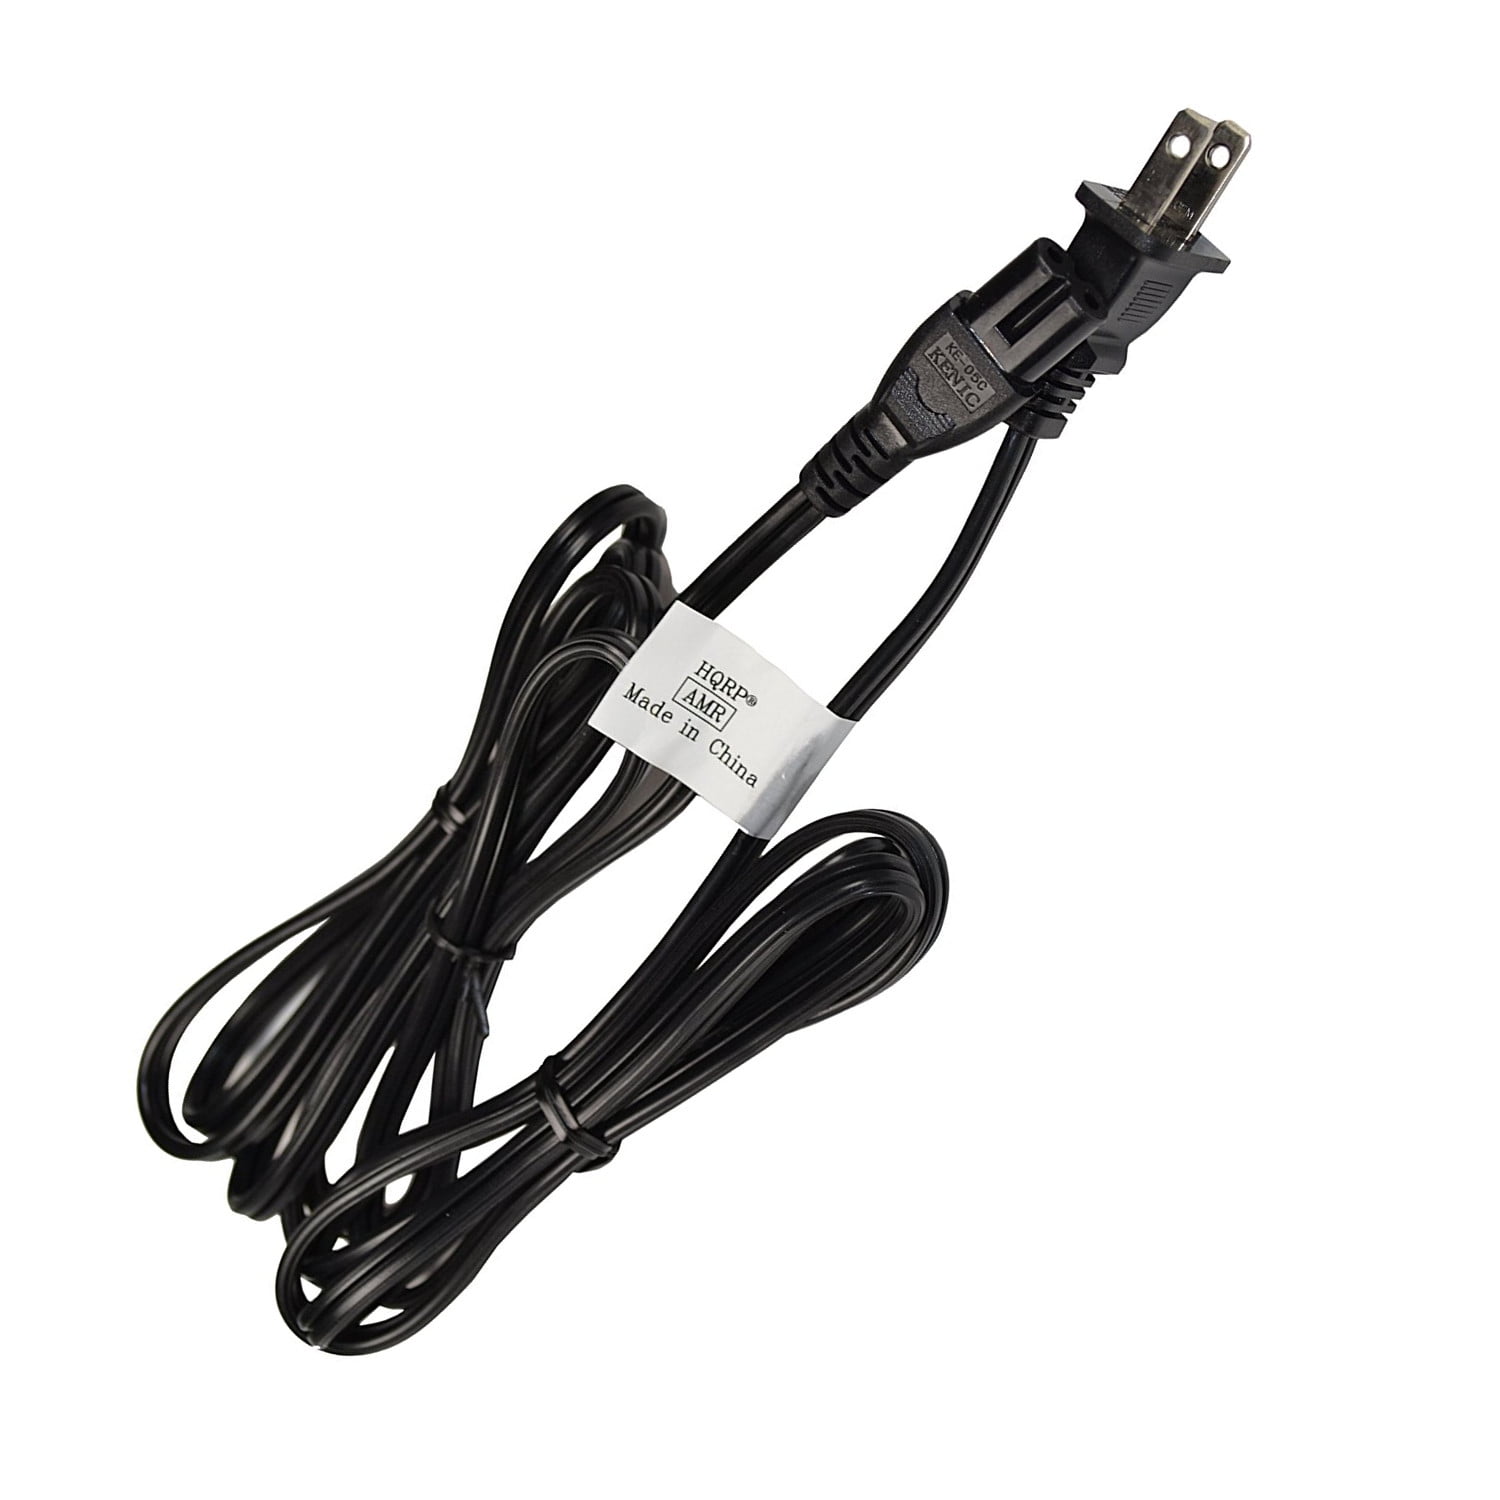 Mains Cable Plus HQRP Coaster HQRP 5ft AC Power Cord for LG LF6100 50LF6100 55LF6100 60LF6100 